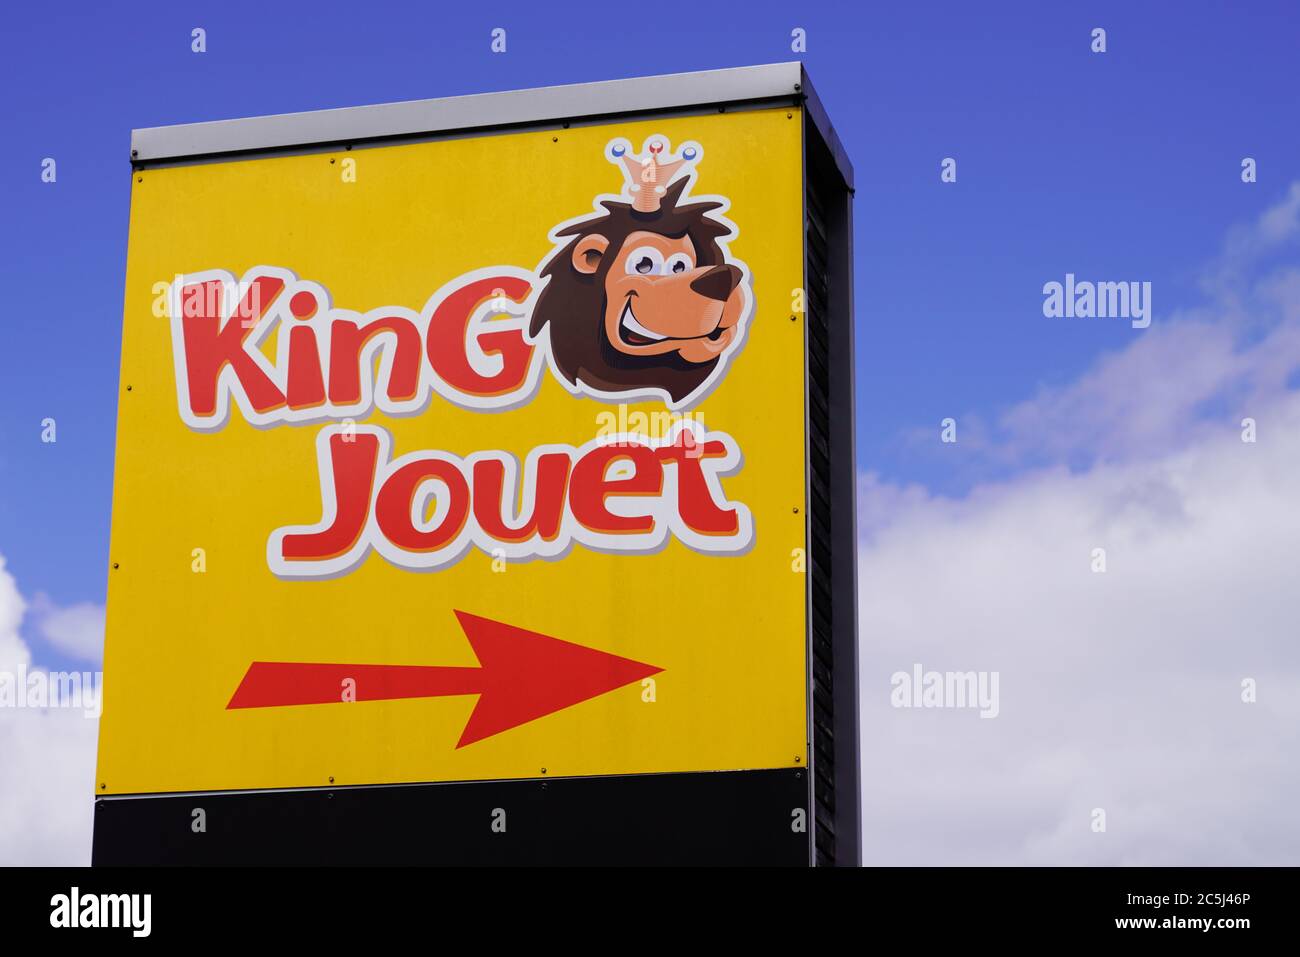 Bordeaux , Aquitaine / France - 07 02 2020 : King Jouet logo and lion sign  for shop games and child toy store to kids children baby toys brand Stock  Photo - Alamy